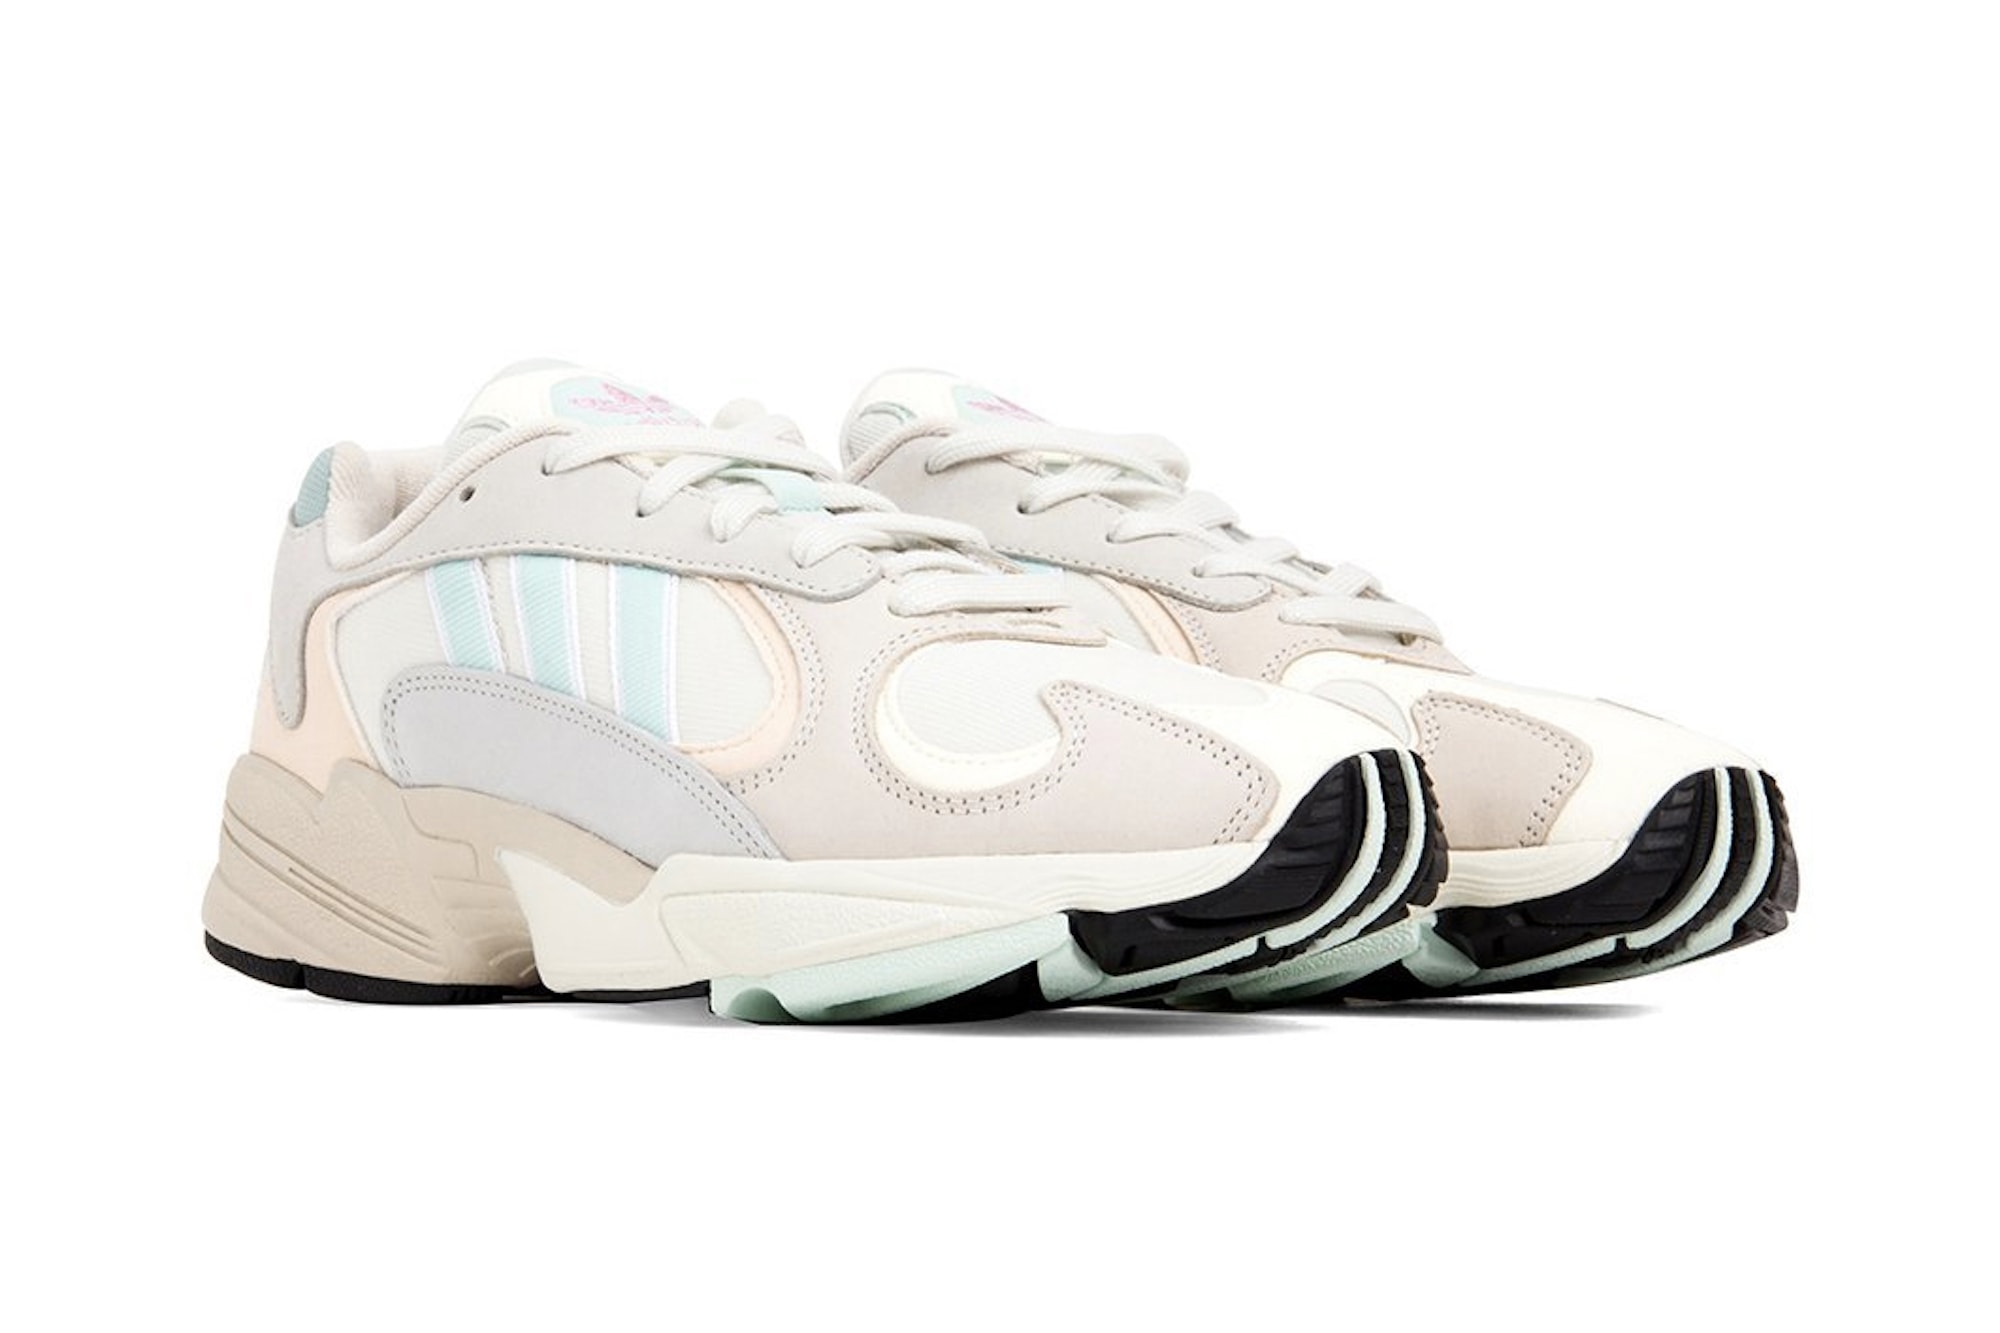 adidas Orignals Yung-1 in "Off-White/Ice Mint" Chunky Shoe Spring Sneaker Creme Grey Blue Trainer